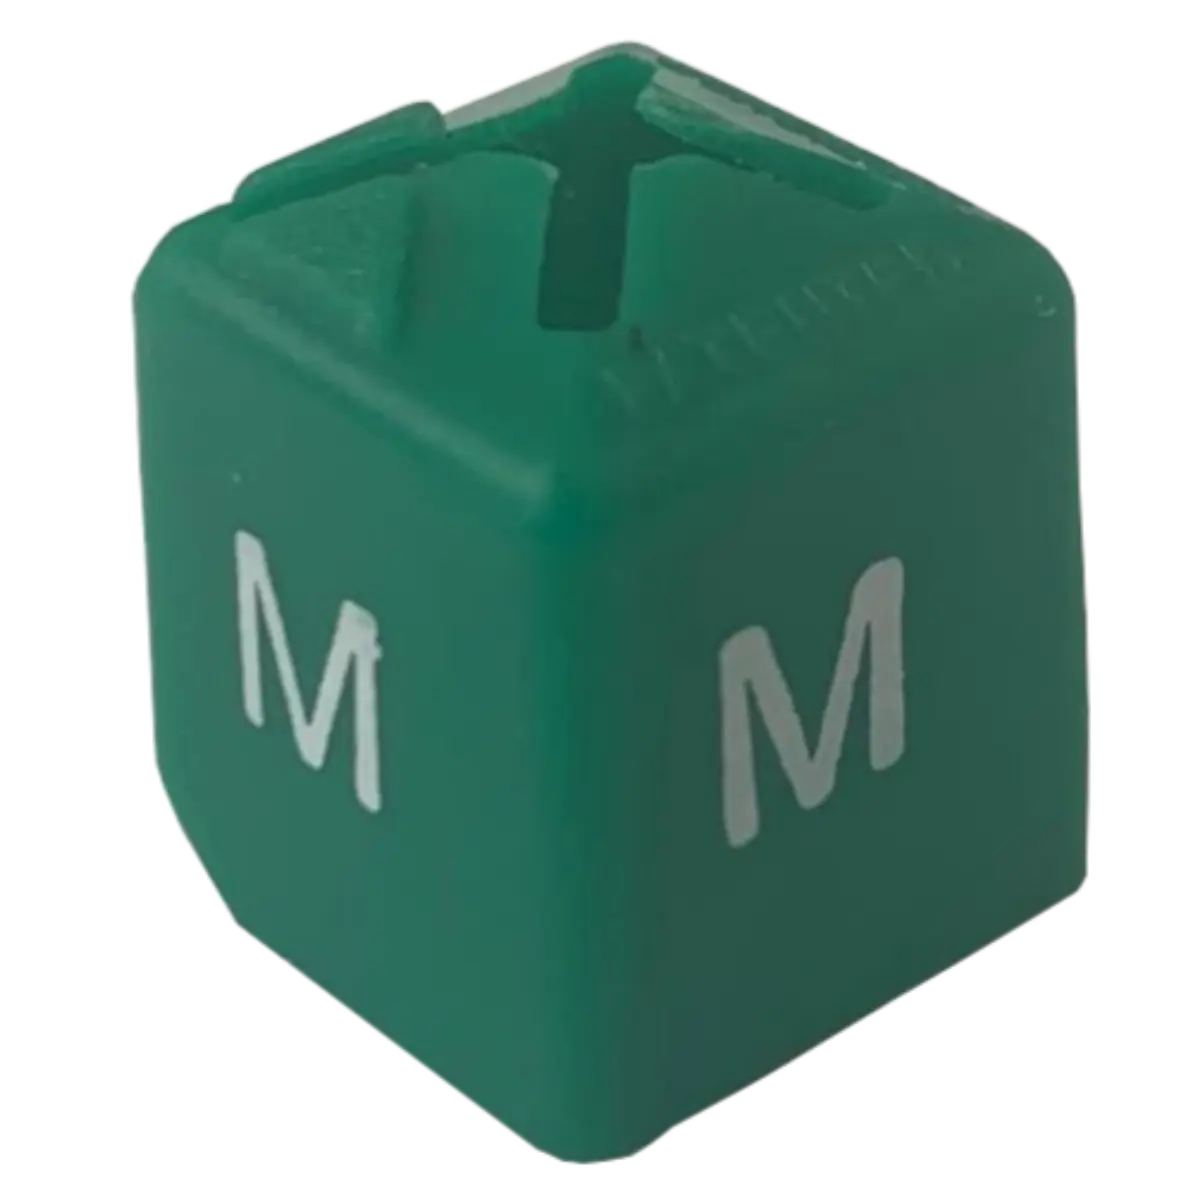 Easily identify clothing sizes with our size cubes, perfect for mounting on top of a clothes hanger